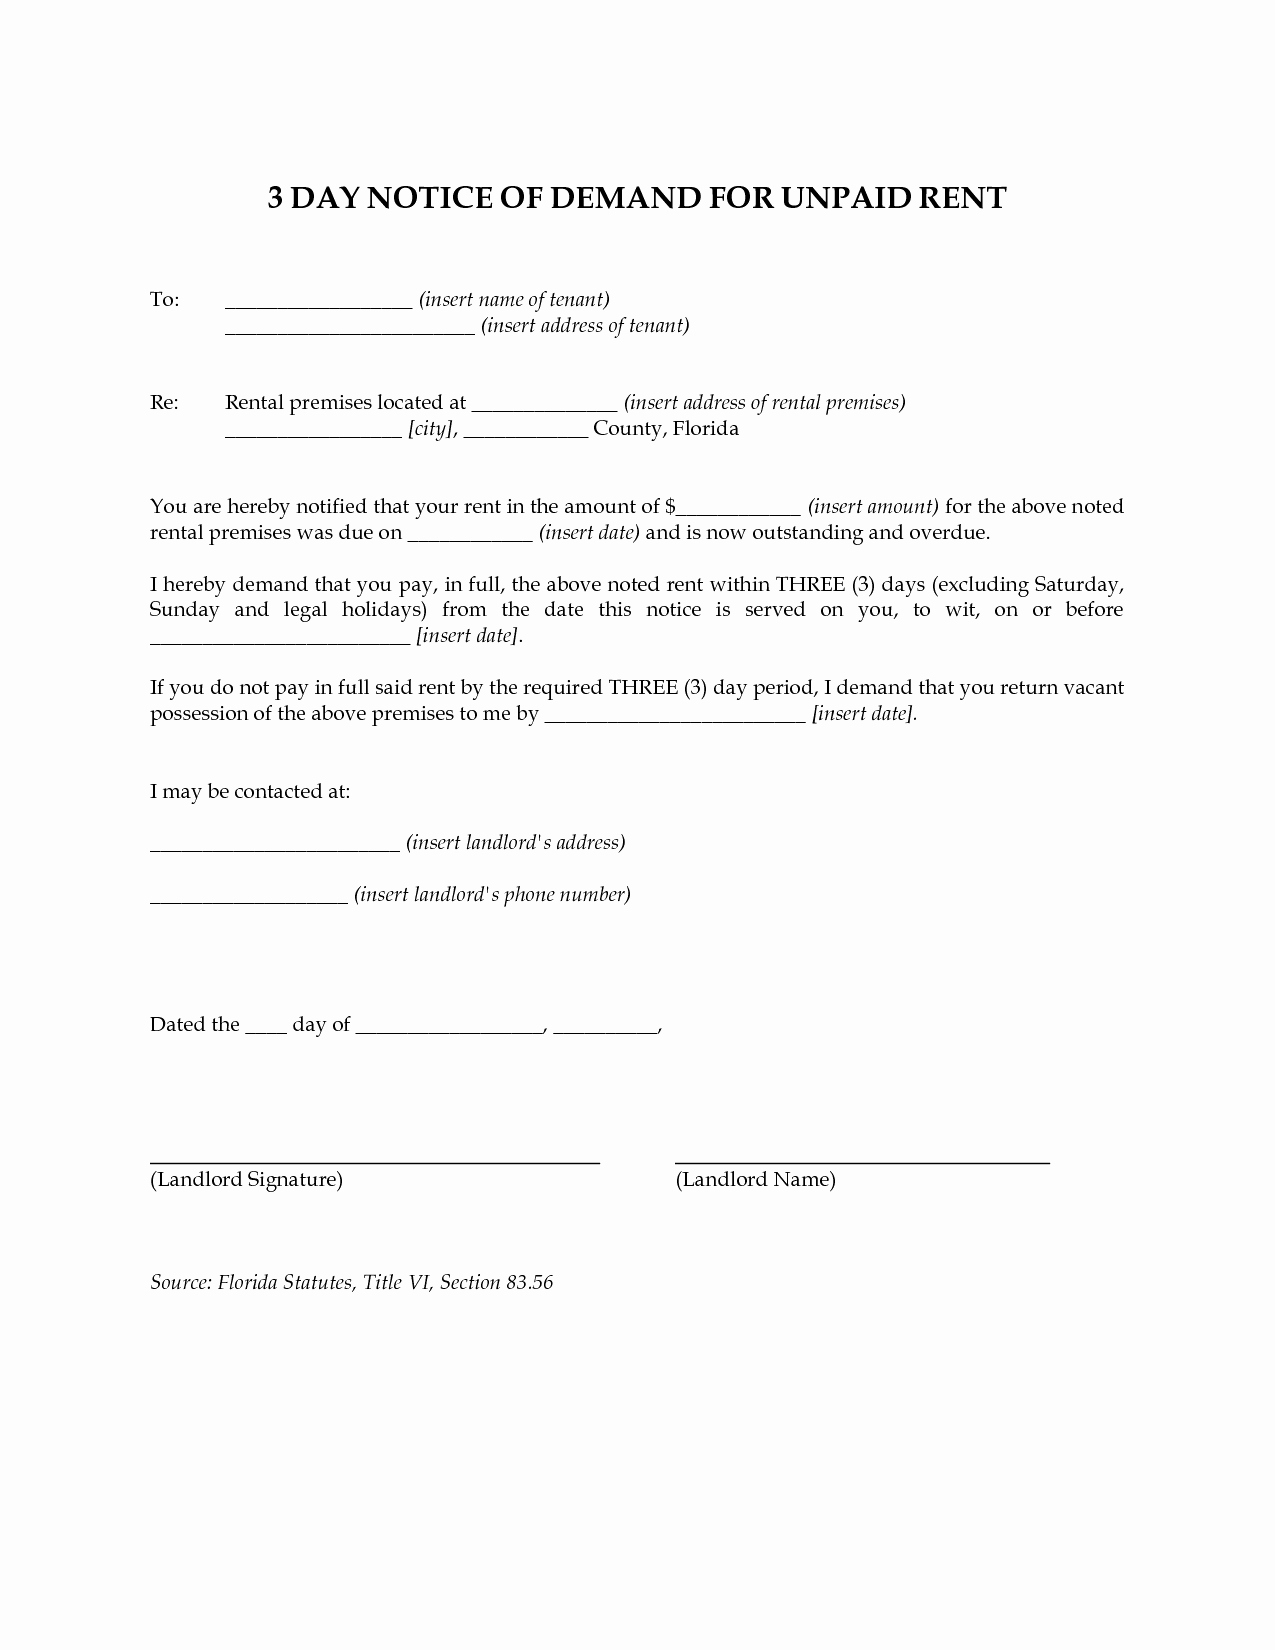 Demand Letter to Landlord Template - Sample Demand Letter for Unpaid Rent Beautiful Letter Od Demand